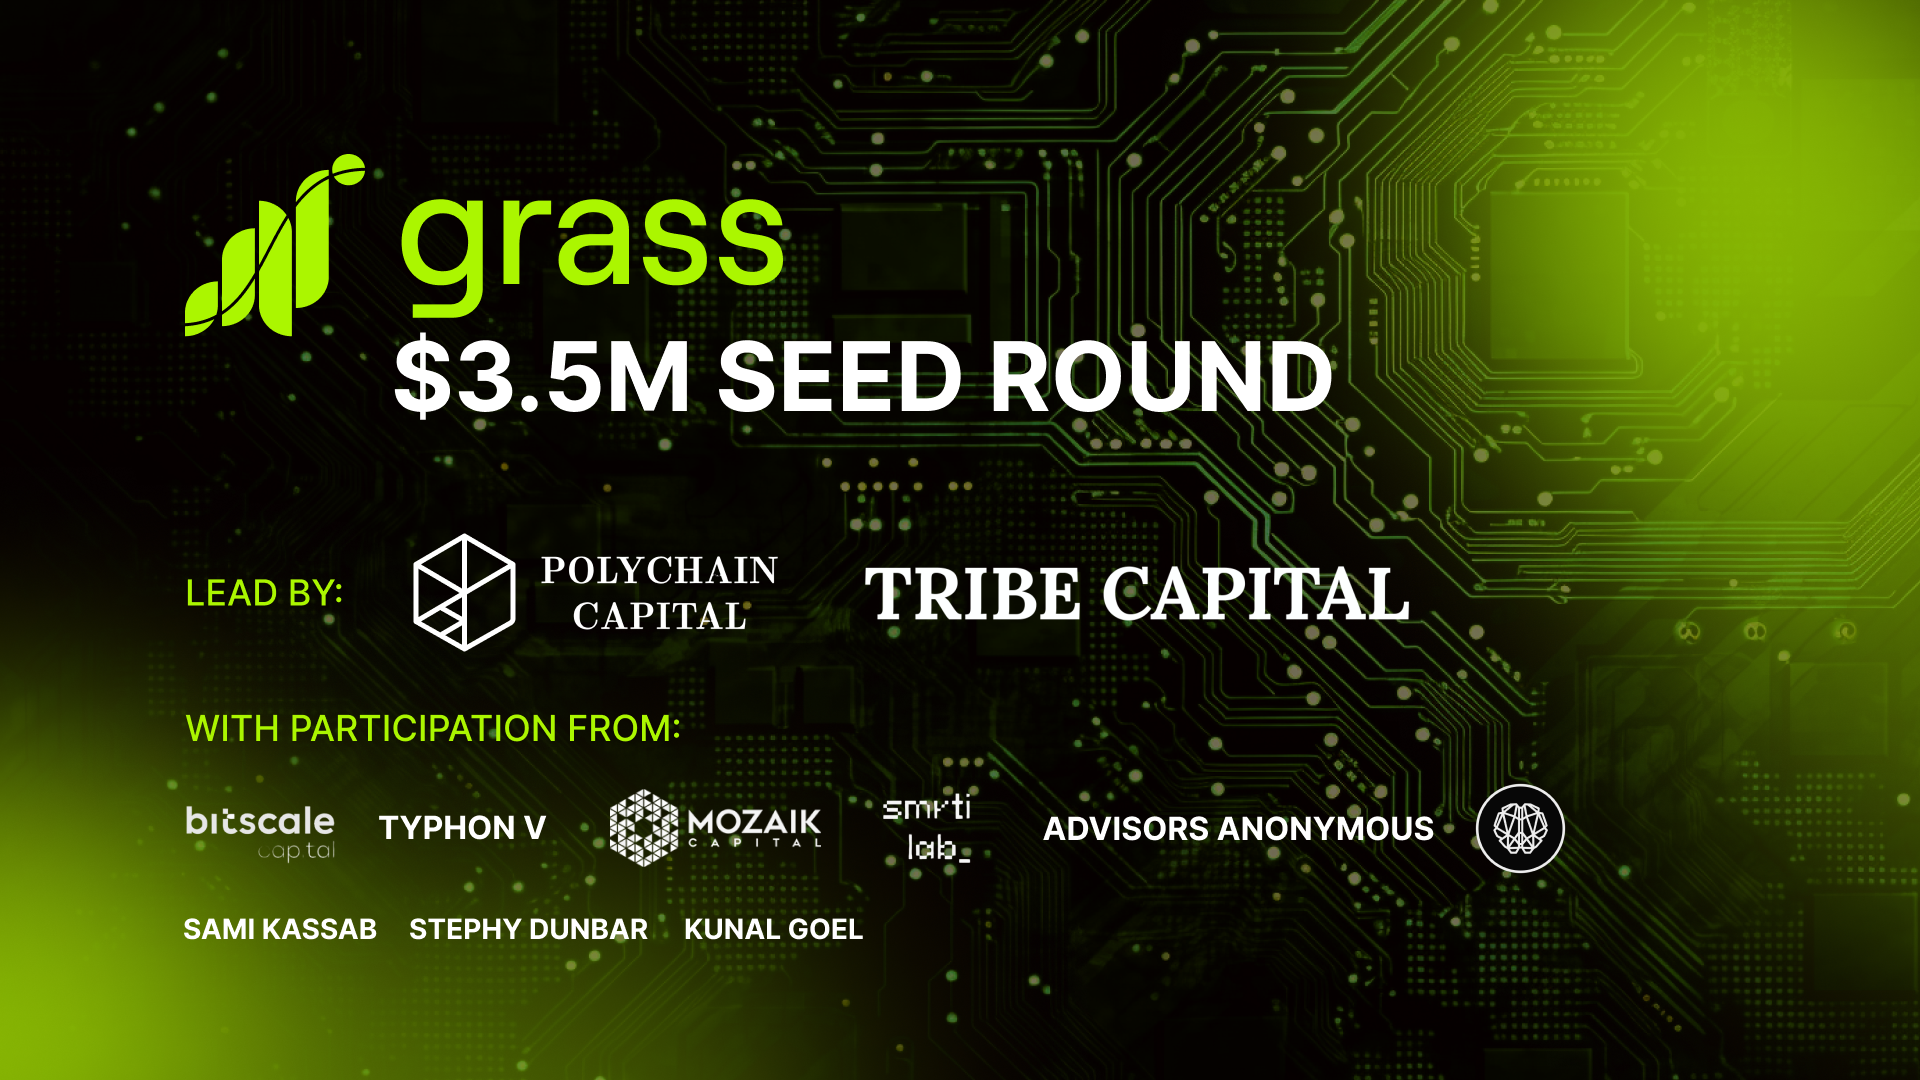 Grass Raises $3.5 Million Seed Round to become the Oracle for Decentralized AI